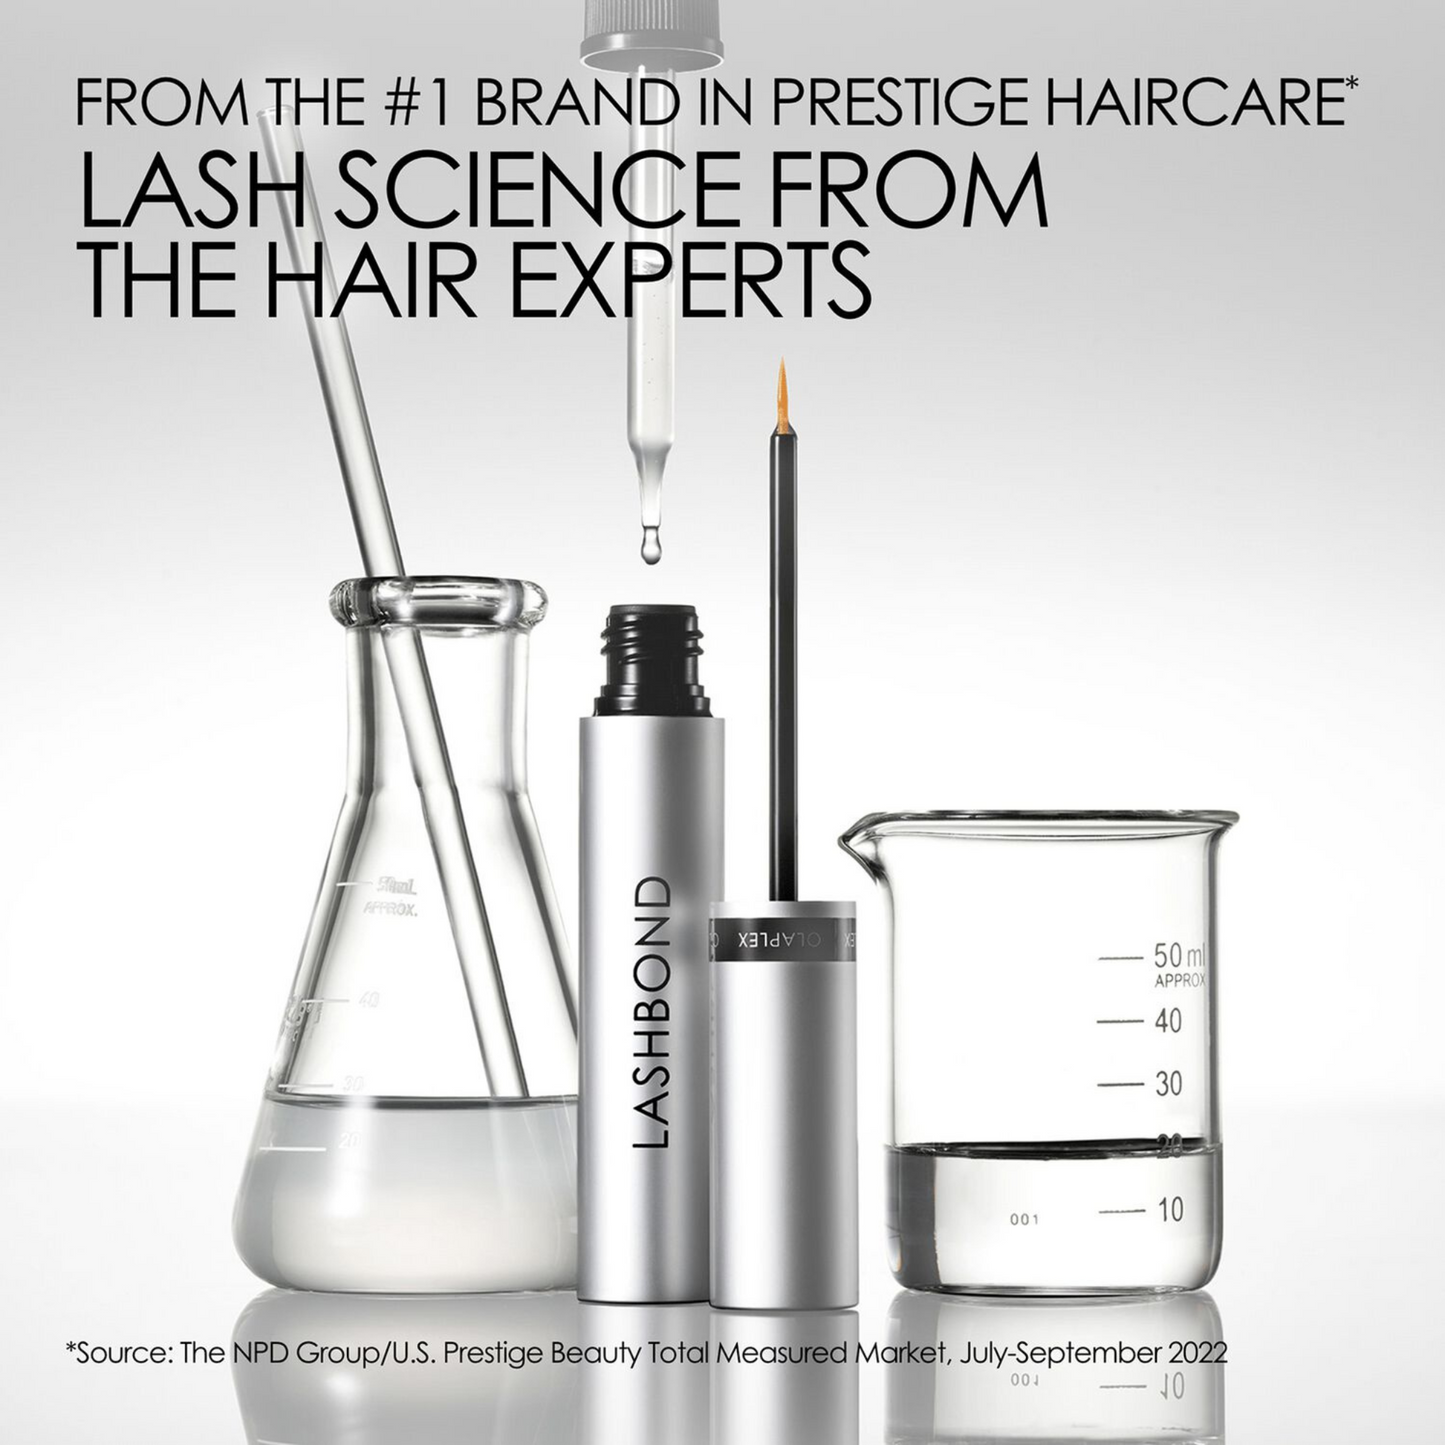 Experience the power of OLAPLEX hair science for lush lashes. Proprietary OLAPLEX Peptide Complex Technology works in a synergistic blend to safely target the top five lash concerns: length, volume and density, shedding, dryness, and irritation. Ophthalmologist tested. No prostaglandins.  Lash science from the hair experts - formulated with new OLAPLEX Peptide Complex Technology to support natural lash retention and promote the look of longer, thicker, stronger, and fuller lashes.